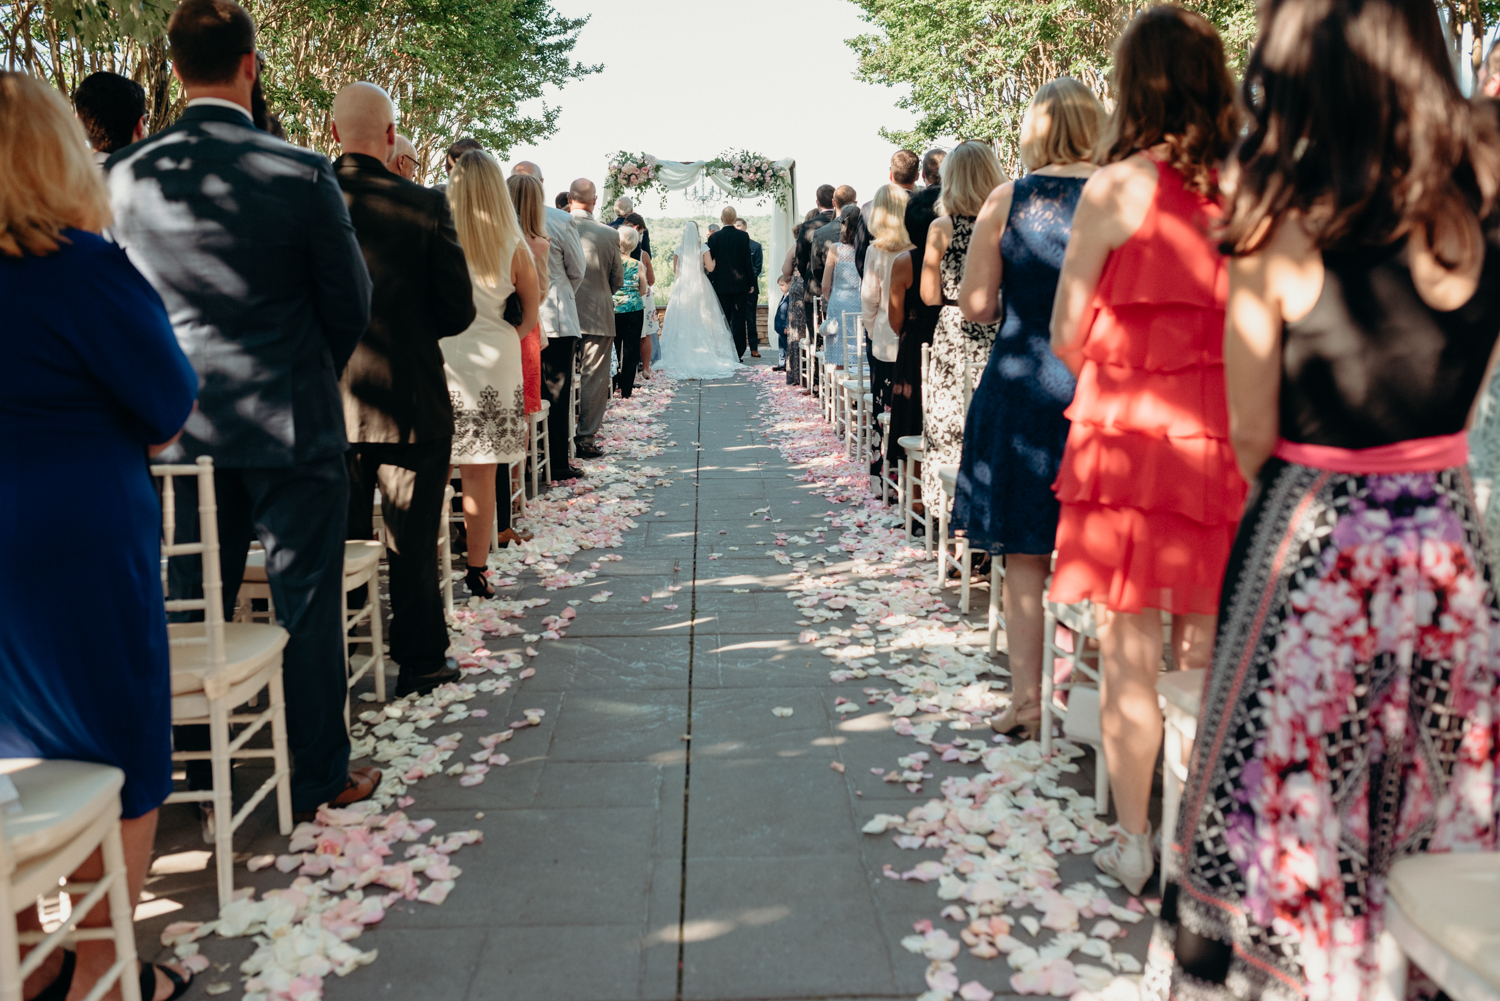 A crowd of guests looks down an aisle lined with rose petals during a wedding ceremony at Lansdowne resort.